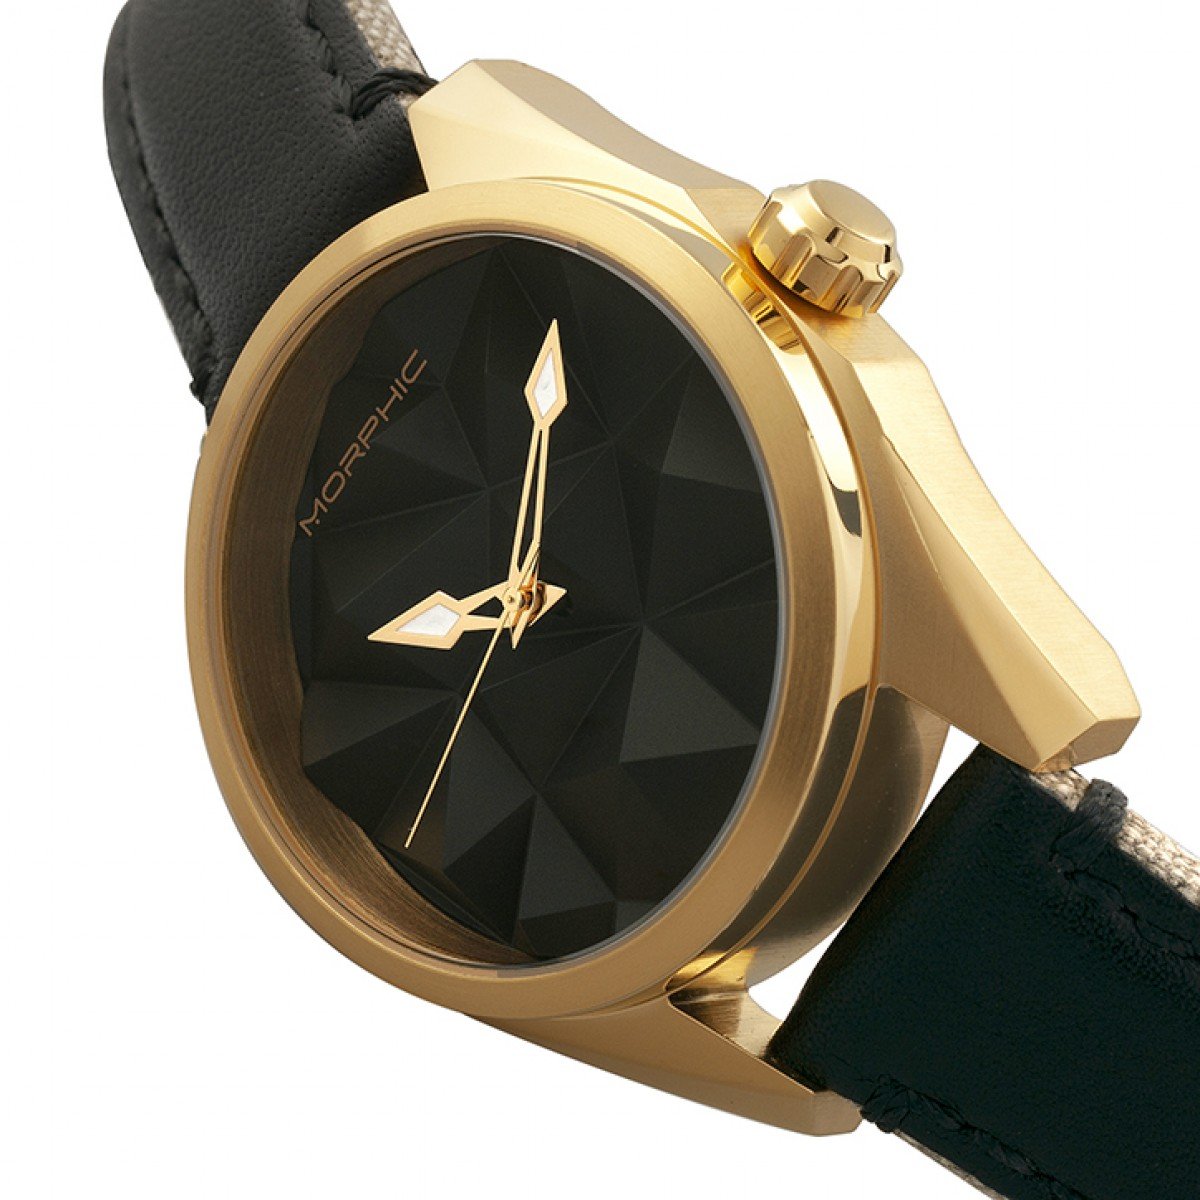 Morphic M59 Series Leather-Overlaid Canvas-Band Watch - Gold/Black - MPH5904